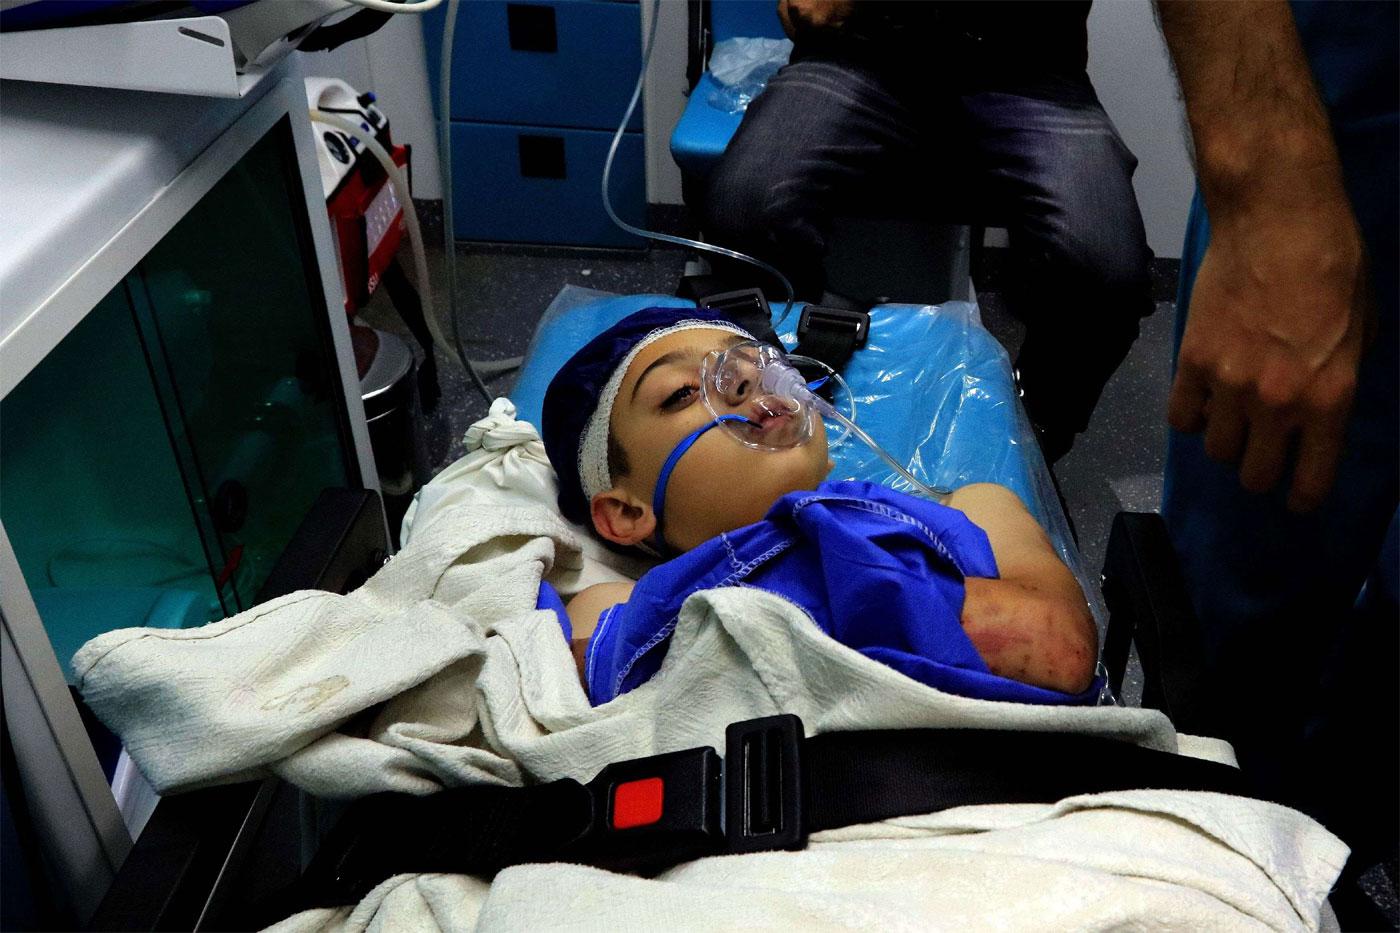 A wounded pupil lays on a stretcher at a hospital after a bus accident near the Dead Sea in Jordan 